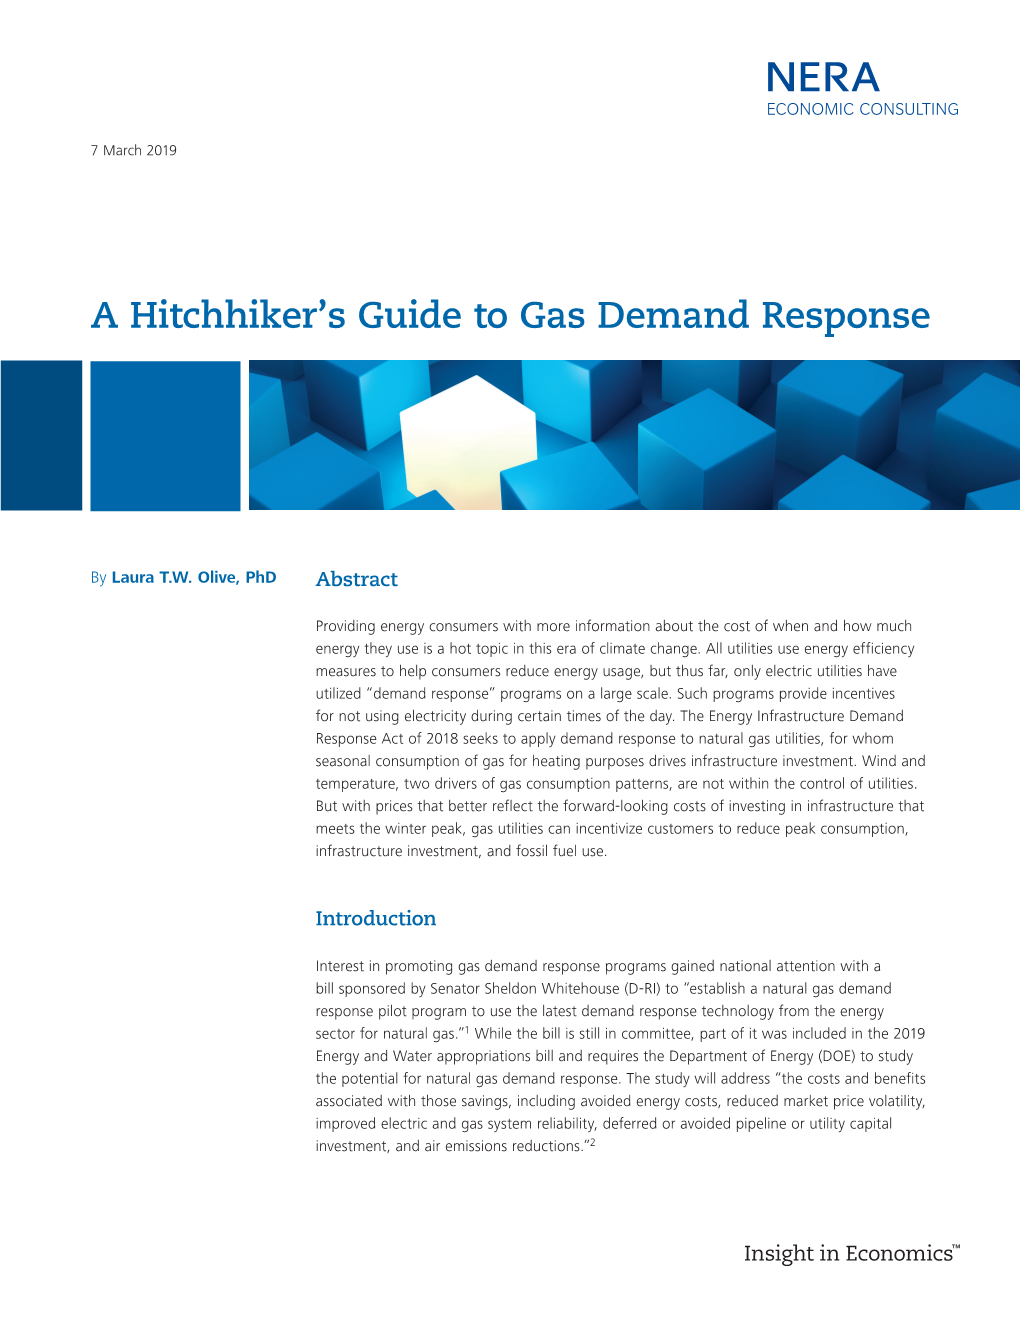 A Hitchhiker's Guide to Gas Demand Response